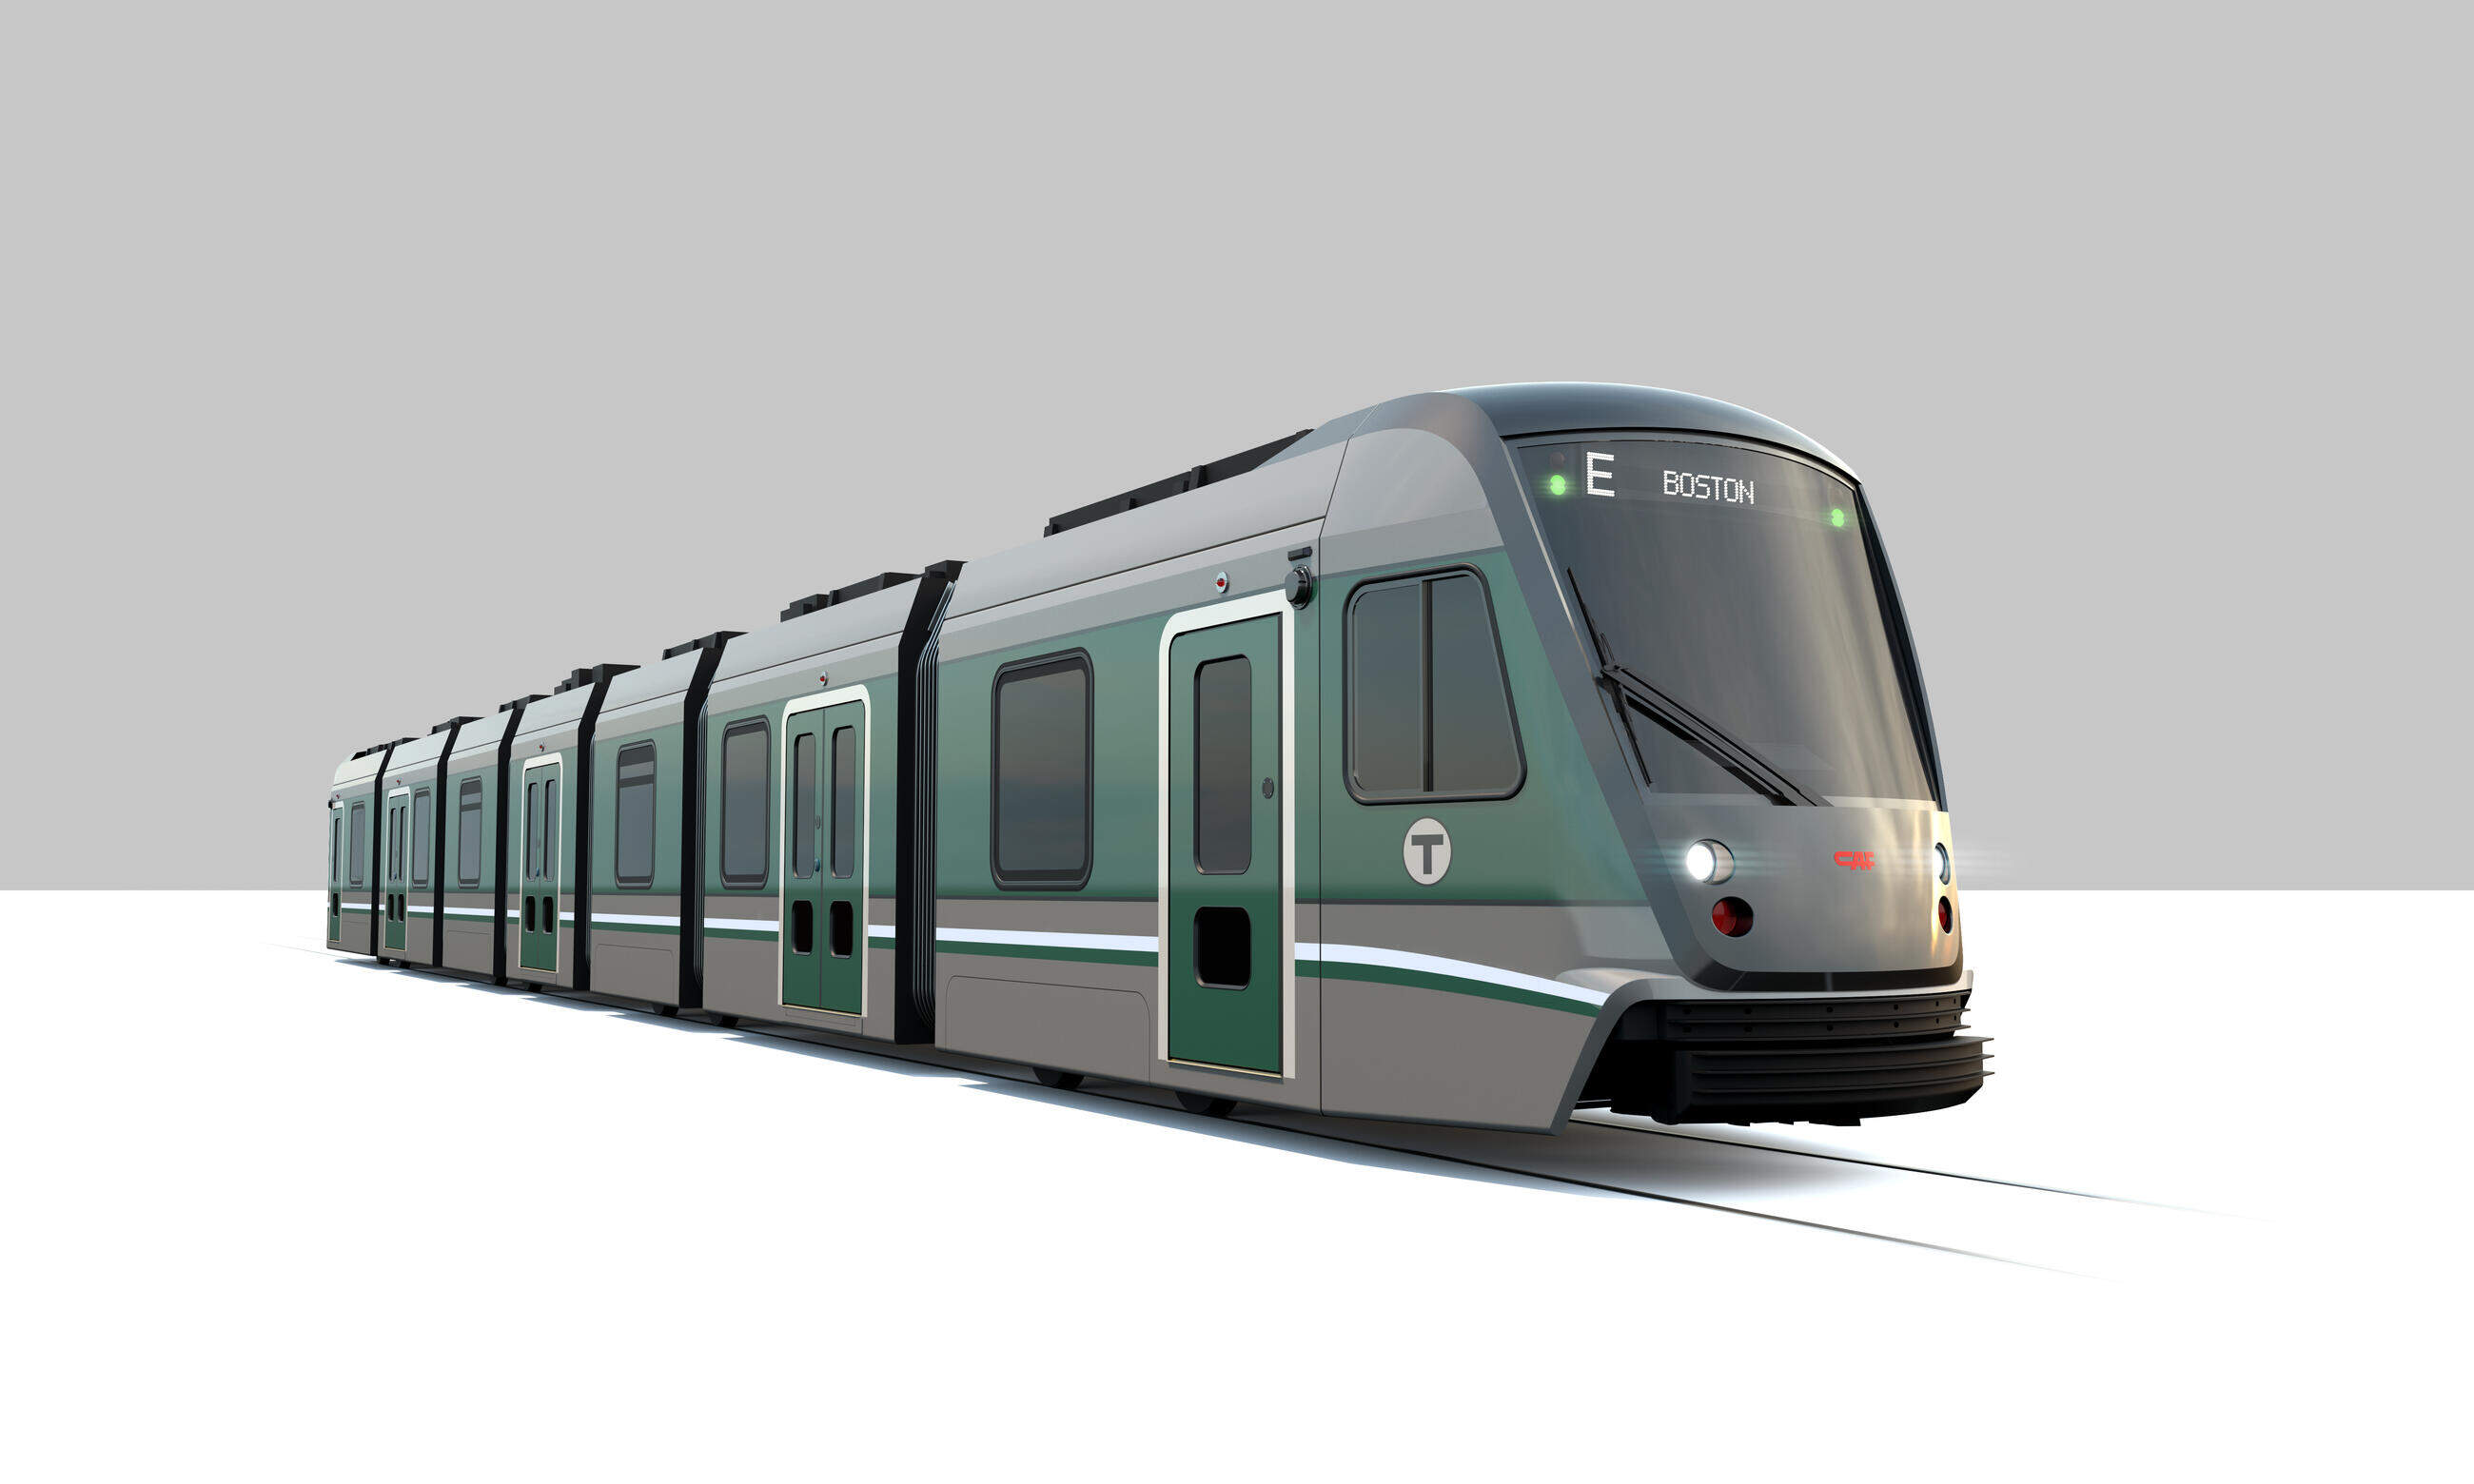 The winning design for the MBTA's future Green Line &quot;supercars,&quot; featuring a green and dark gray paint scheme along the body of the vehicle, green doors, and a white and turquoise green lower running stripe. (MBTA)